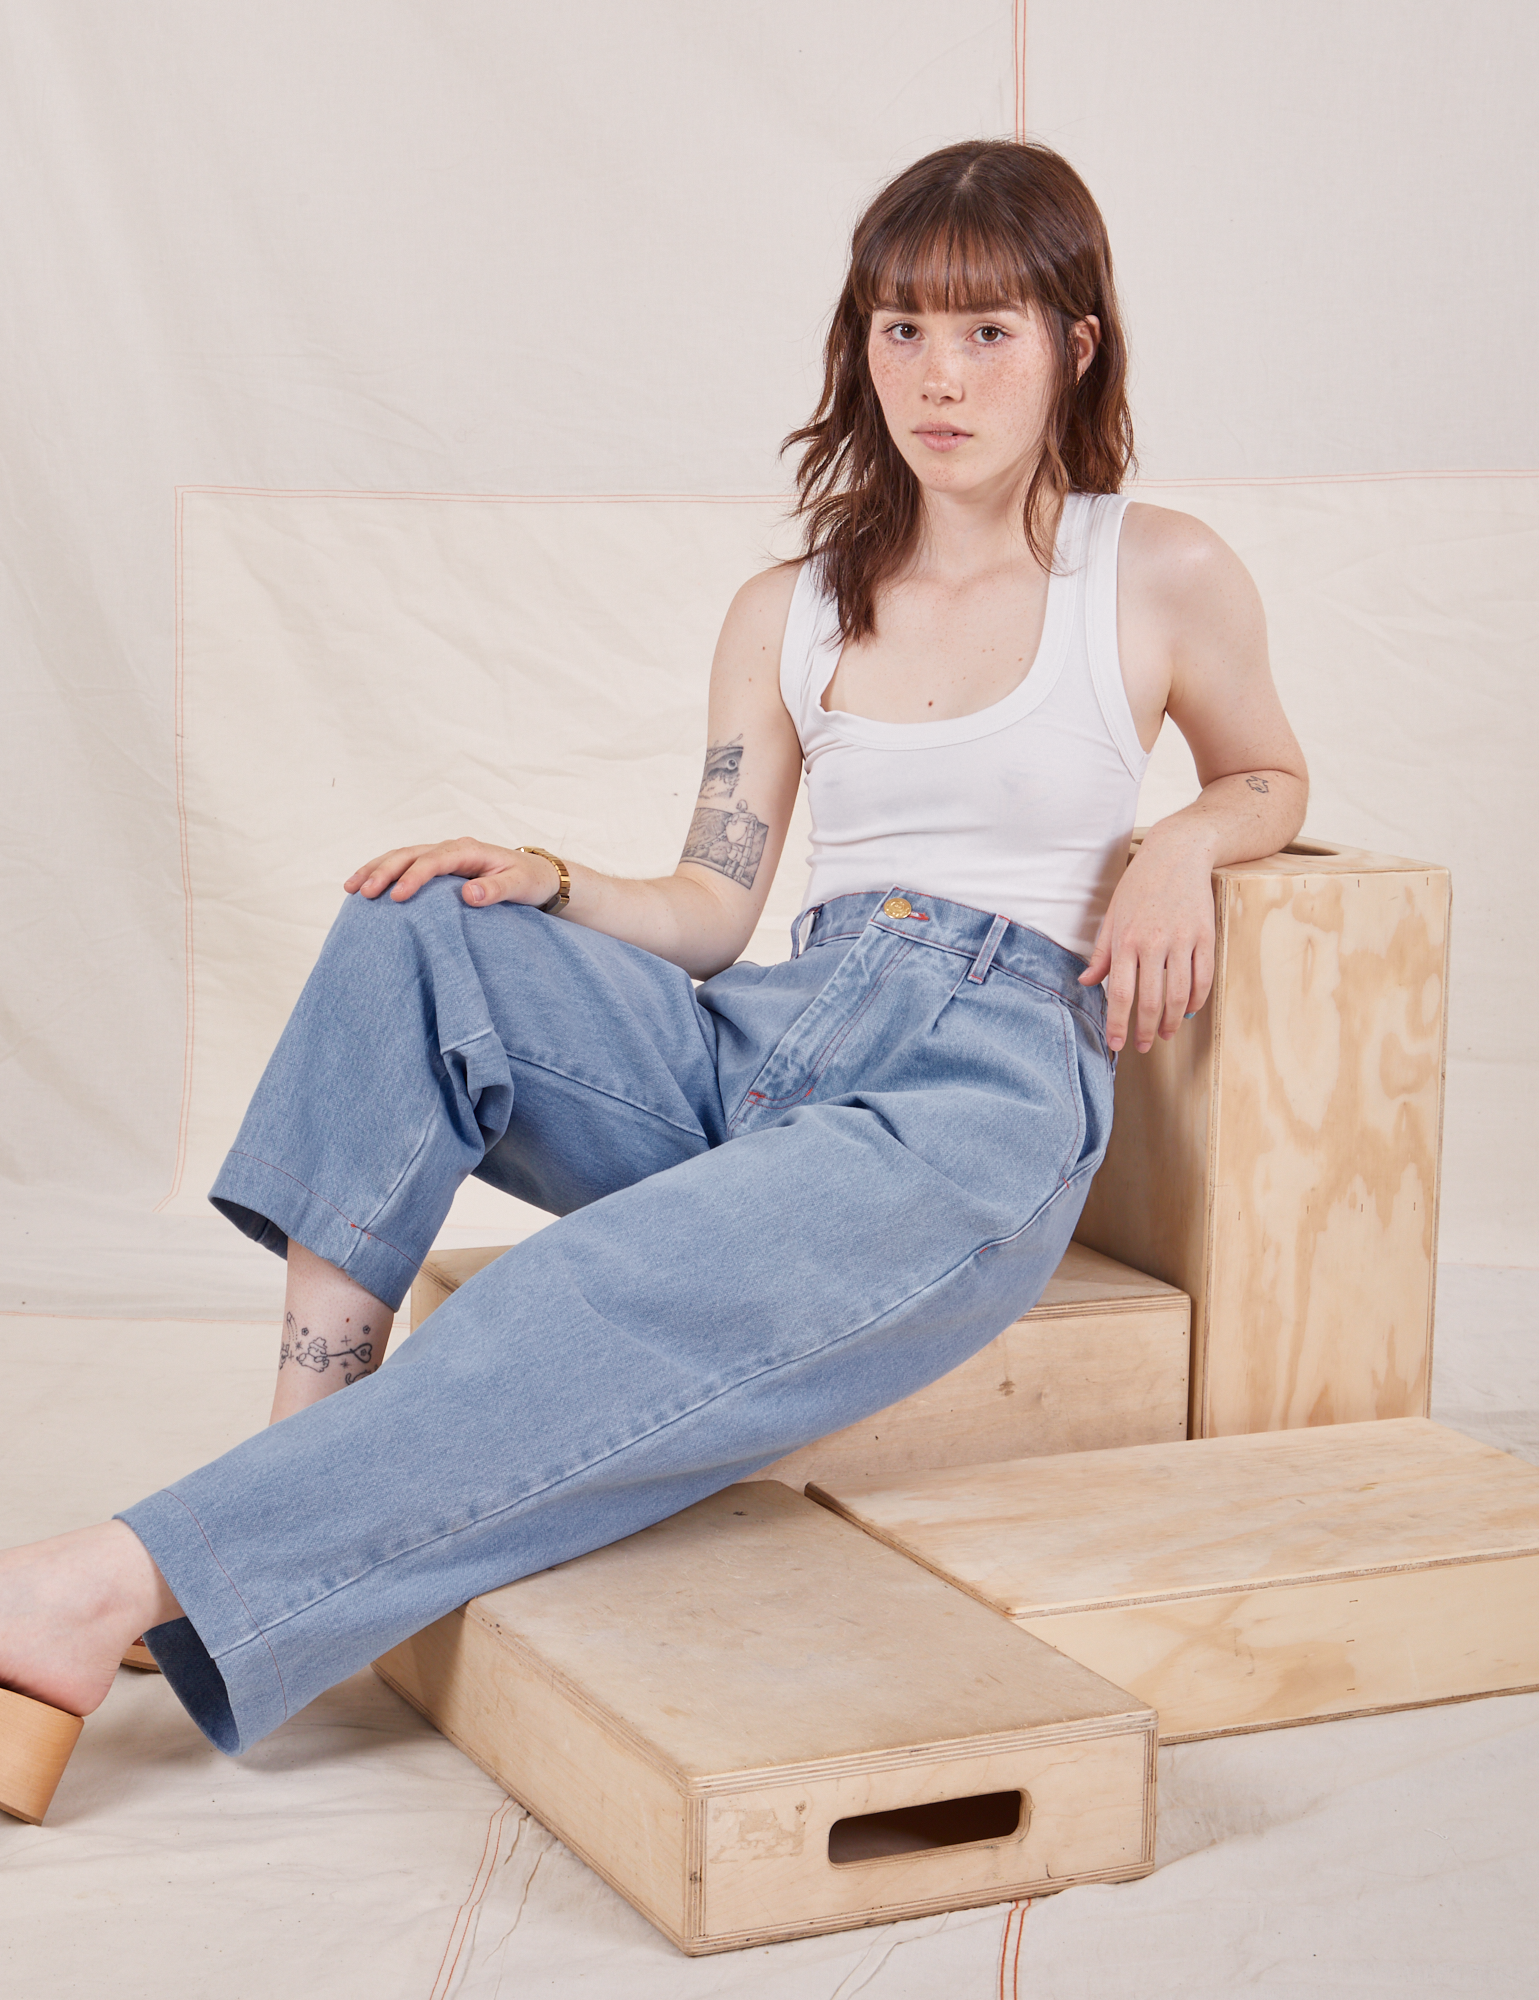 Hana is wearing Denim Trouser Jeans in Light Wash and Cropped Tank Top in vintage tee off-white